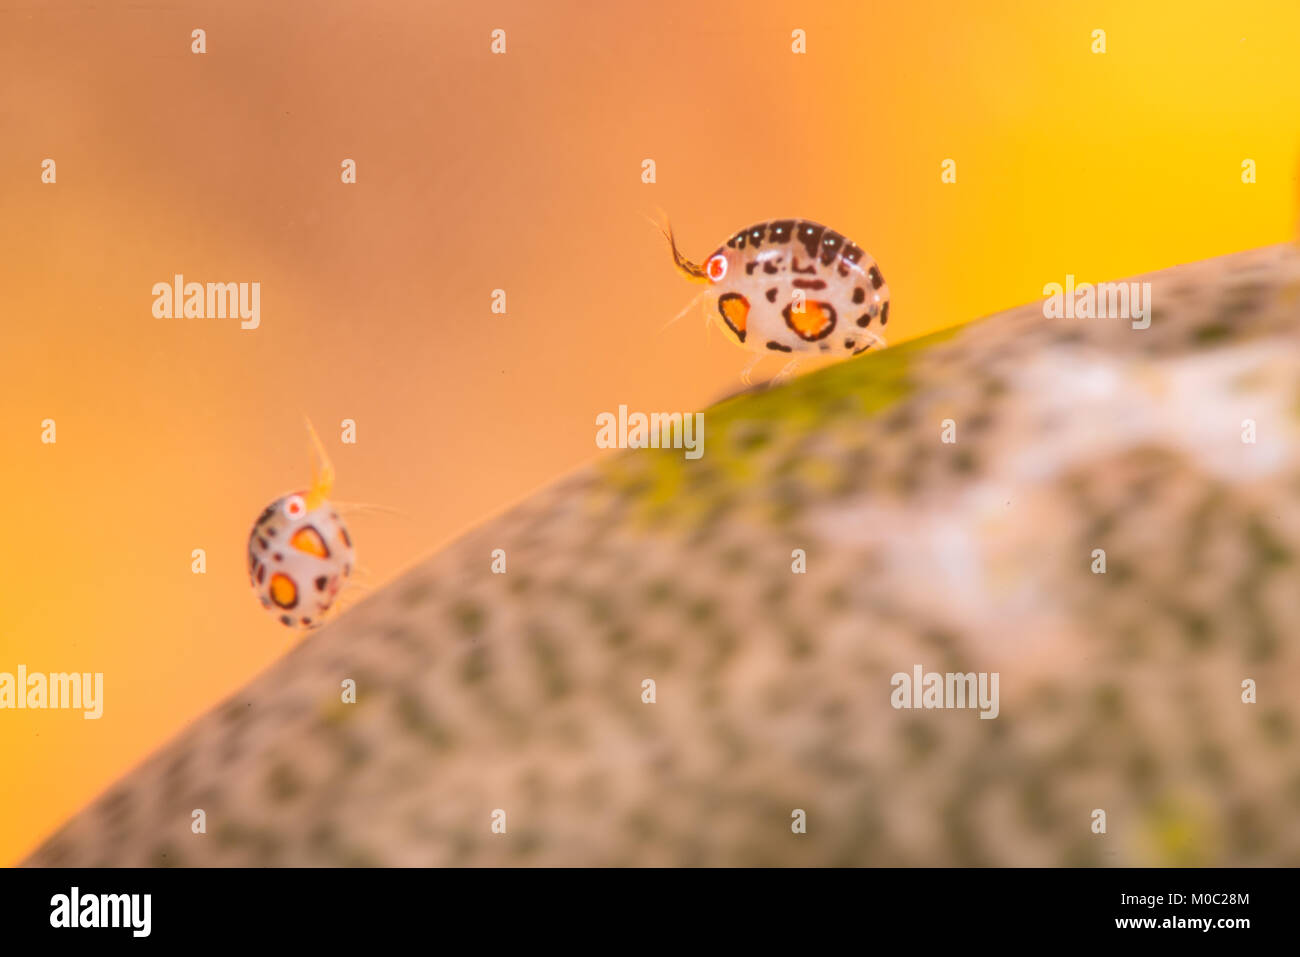 Ladybugs amphipods from the family of the isopods are some of the smallest marine animals visible to human eyes. photographed in Horseshoe bay Komodo. Stock Photo